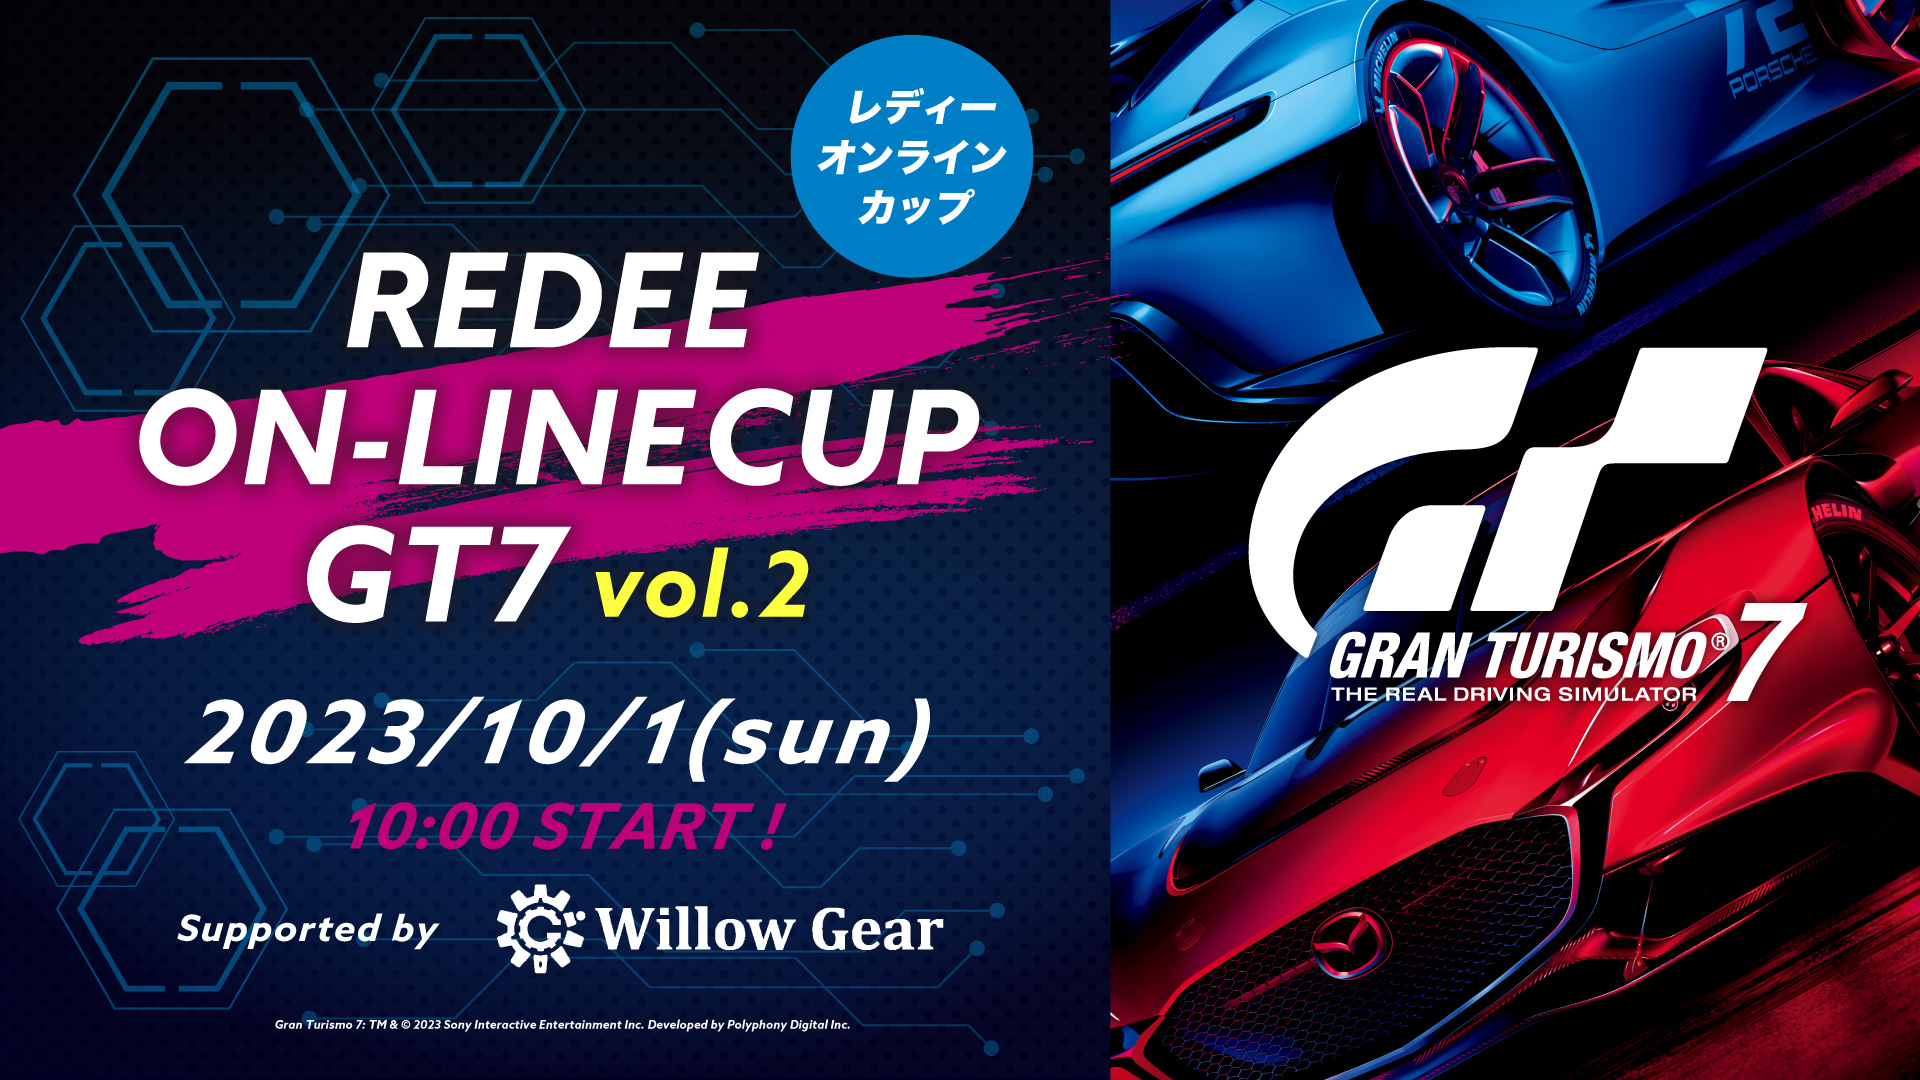 REDEE（レディー）株式会社主催、オンラインeスポーツ大会『REDEE ONLINE CUP GT7 vol.2 supported by Willow Gear』を開催しました。